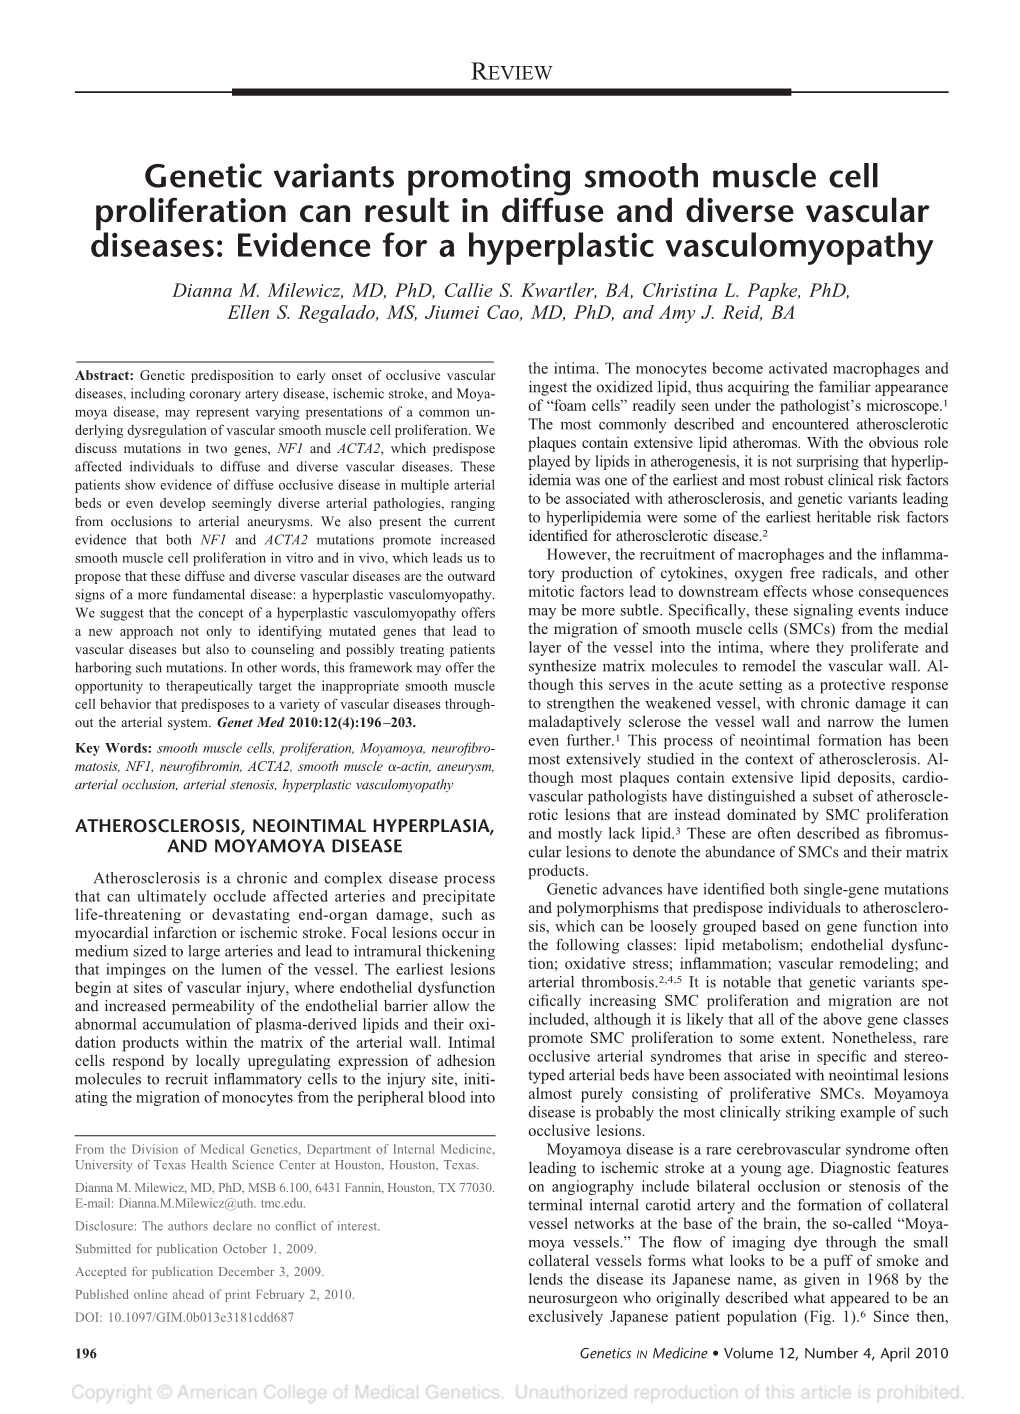 Genetic Variants Promoting Smooth Muscle Cell Proliferation Can Result in Diffuse and Diverse Vascular Diseases: Evidence for a Hyperplastic Vasculomyopathy Dianna M